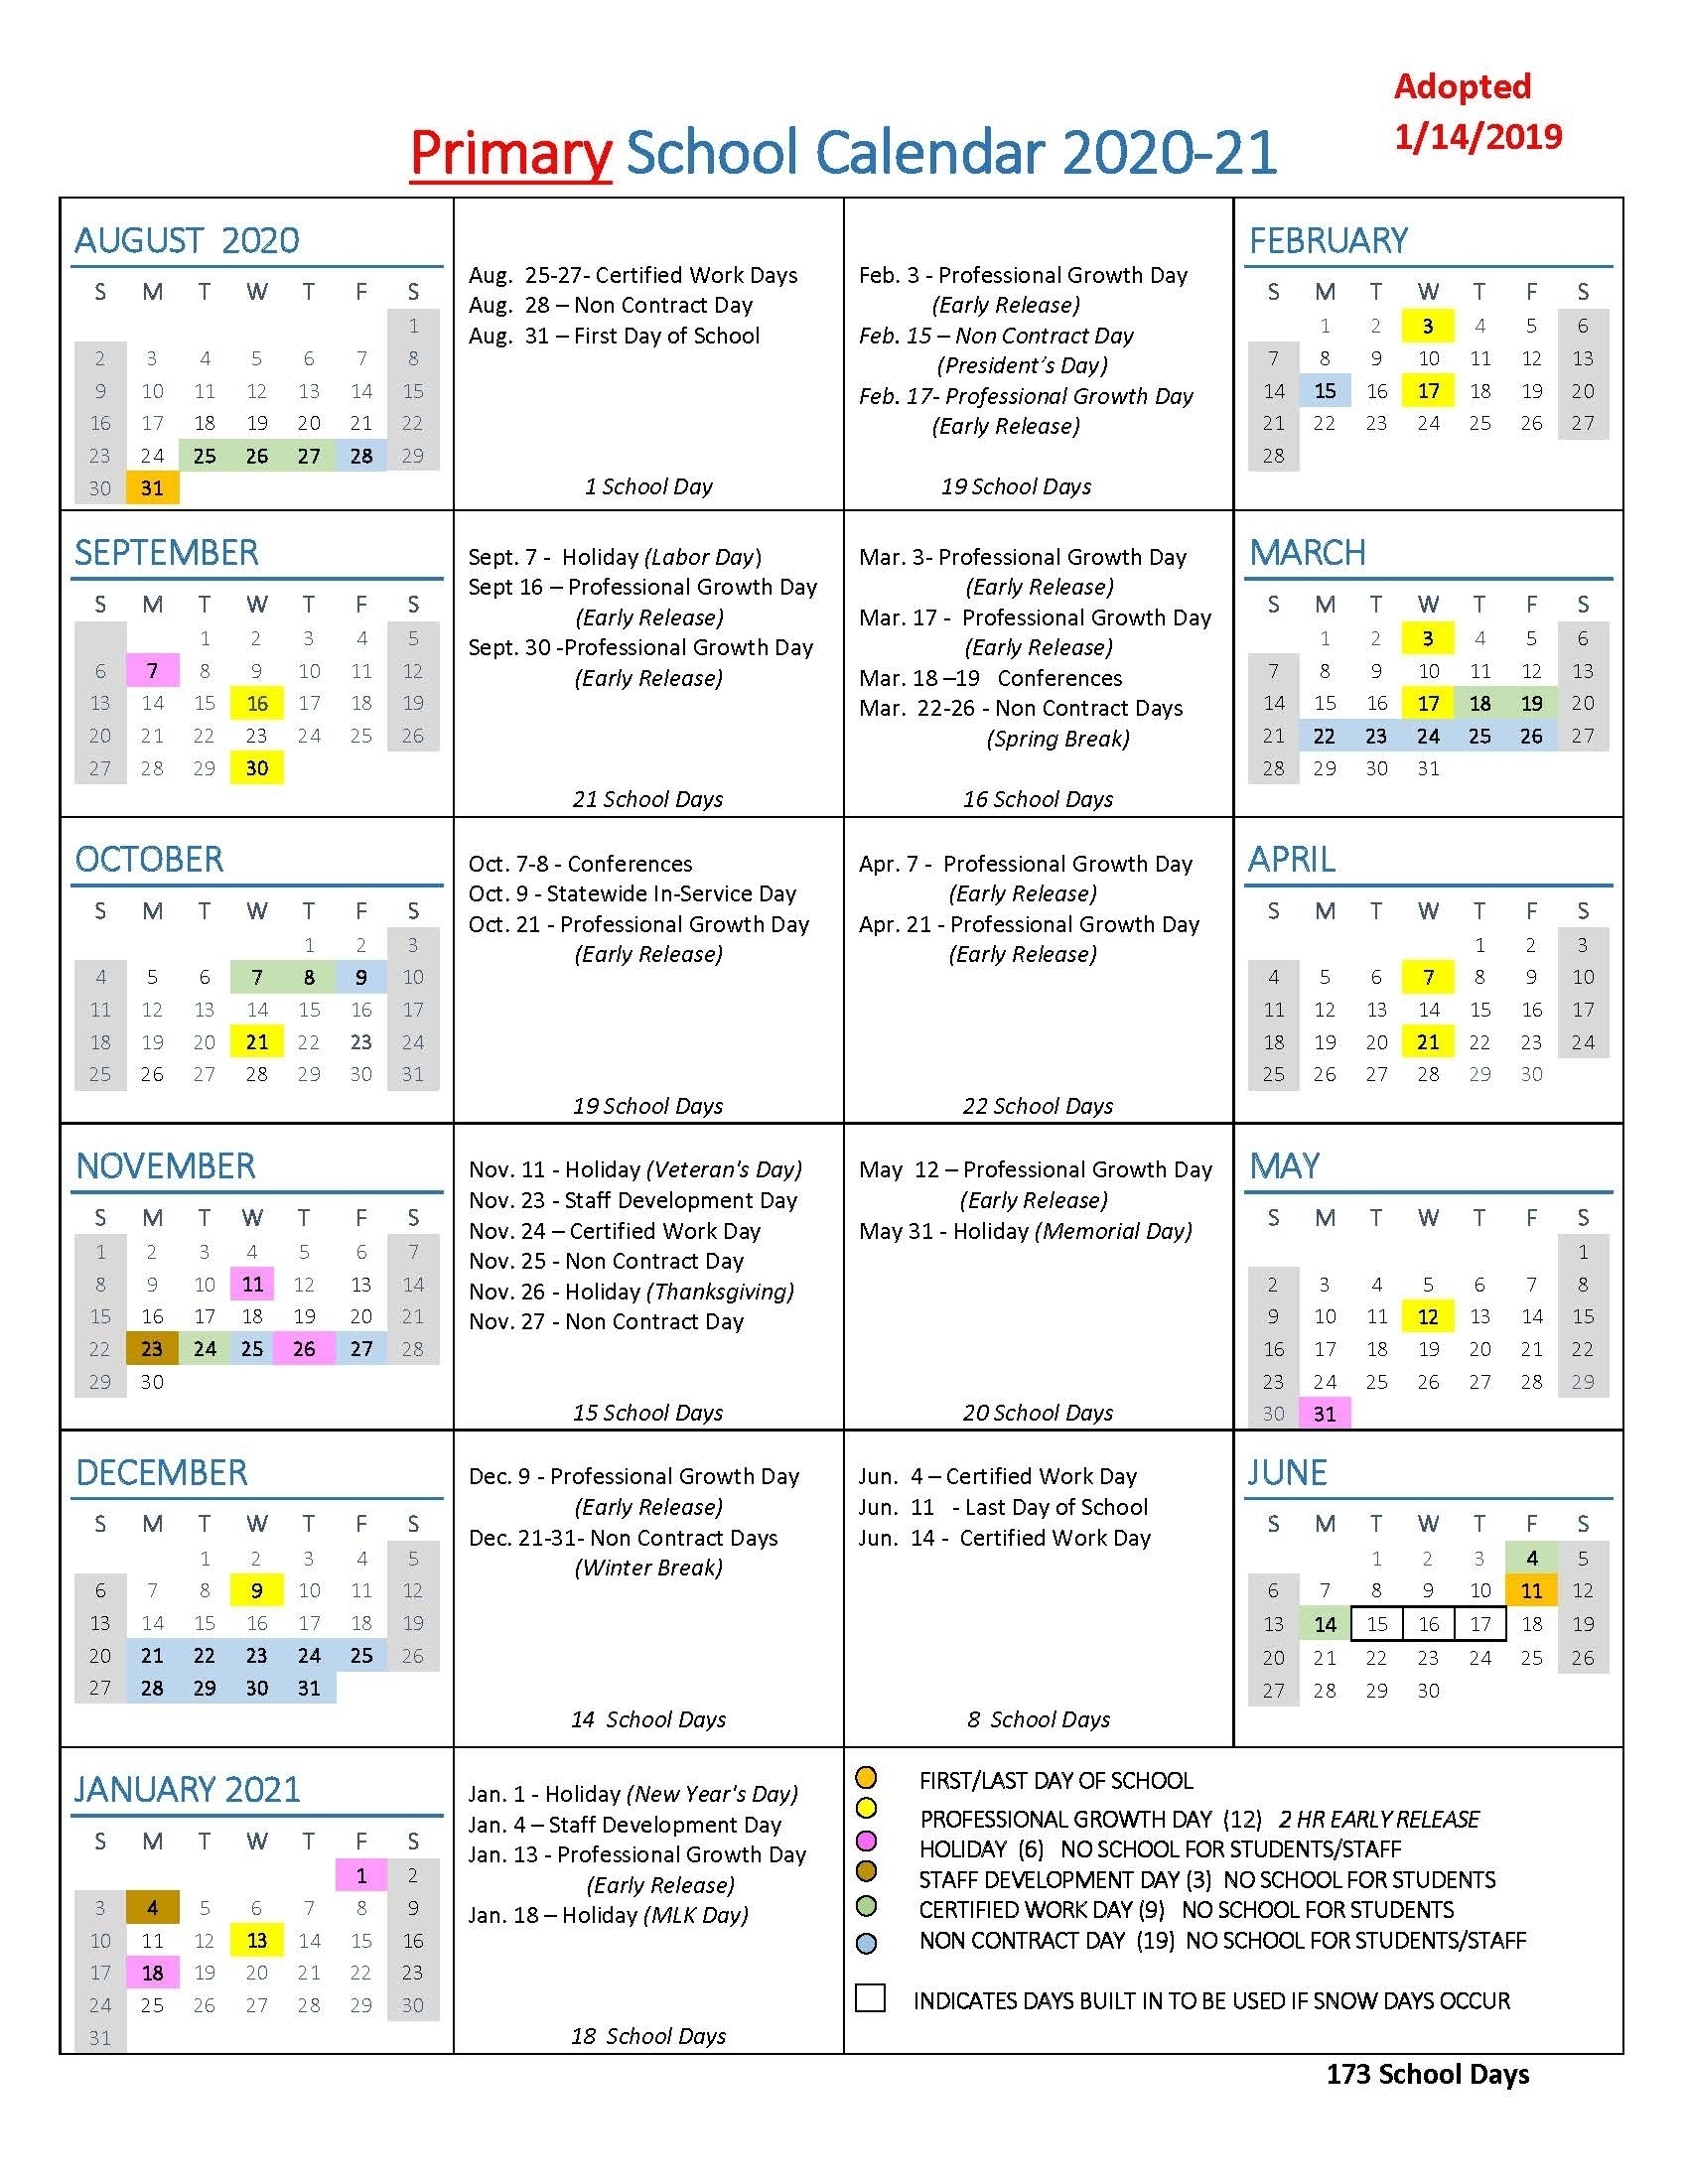 Calendar With All The Special Days In 2020 - Calendar inside Yearly Calendar Of Special Days 2020